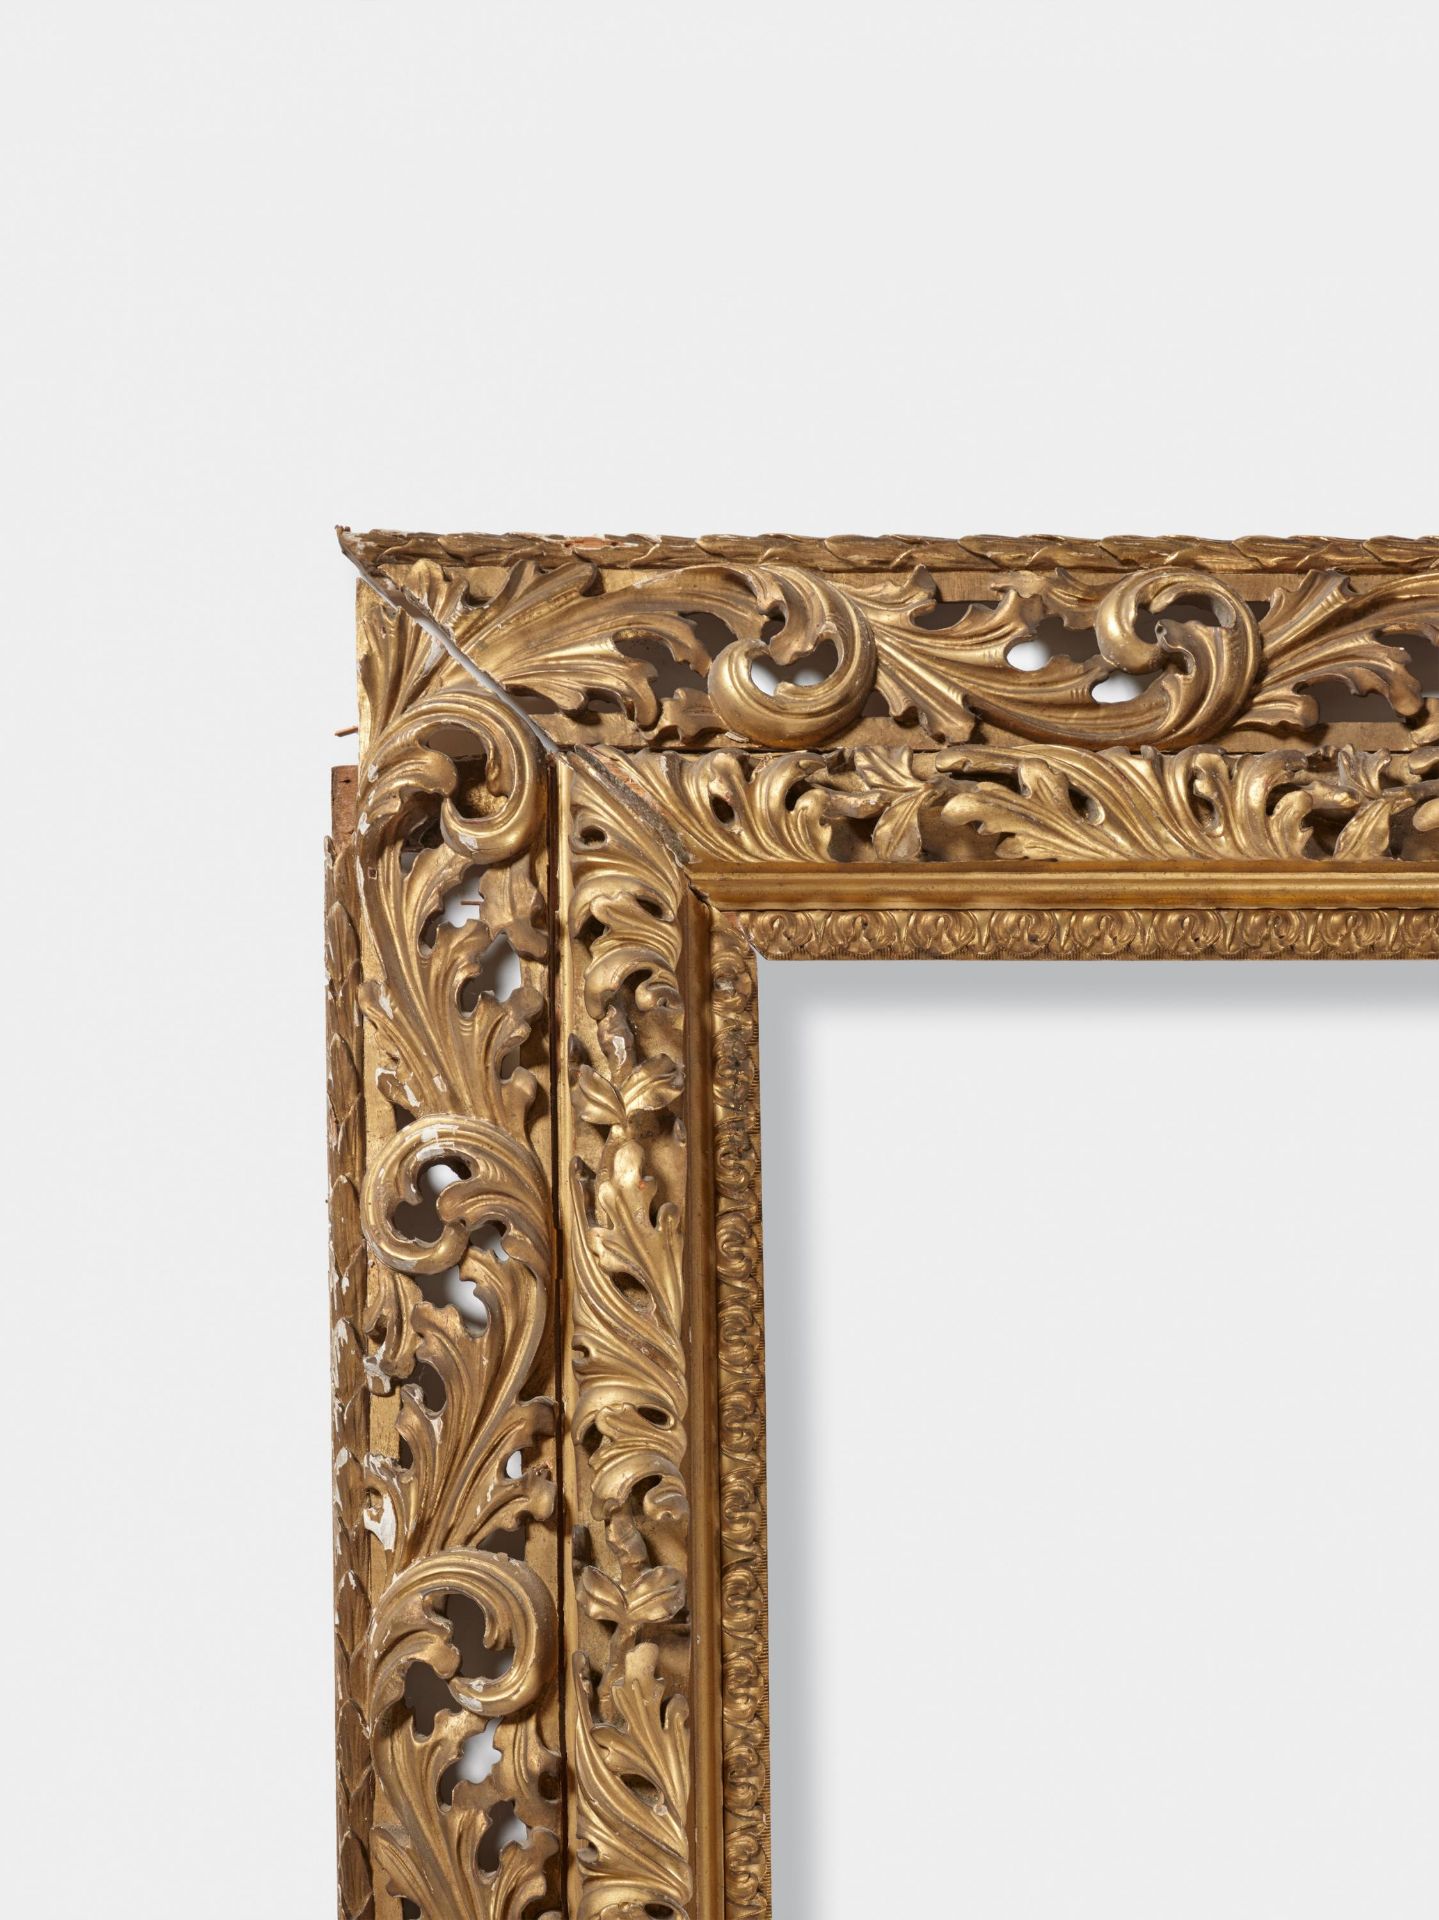 Bologna: Four Singular Sides of the Frame in the Style of the Bolognese Floral Frame - Image 3 of 4